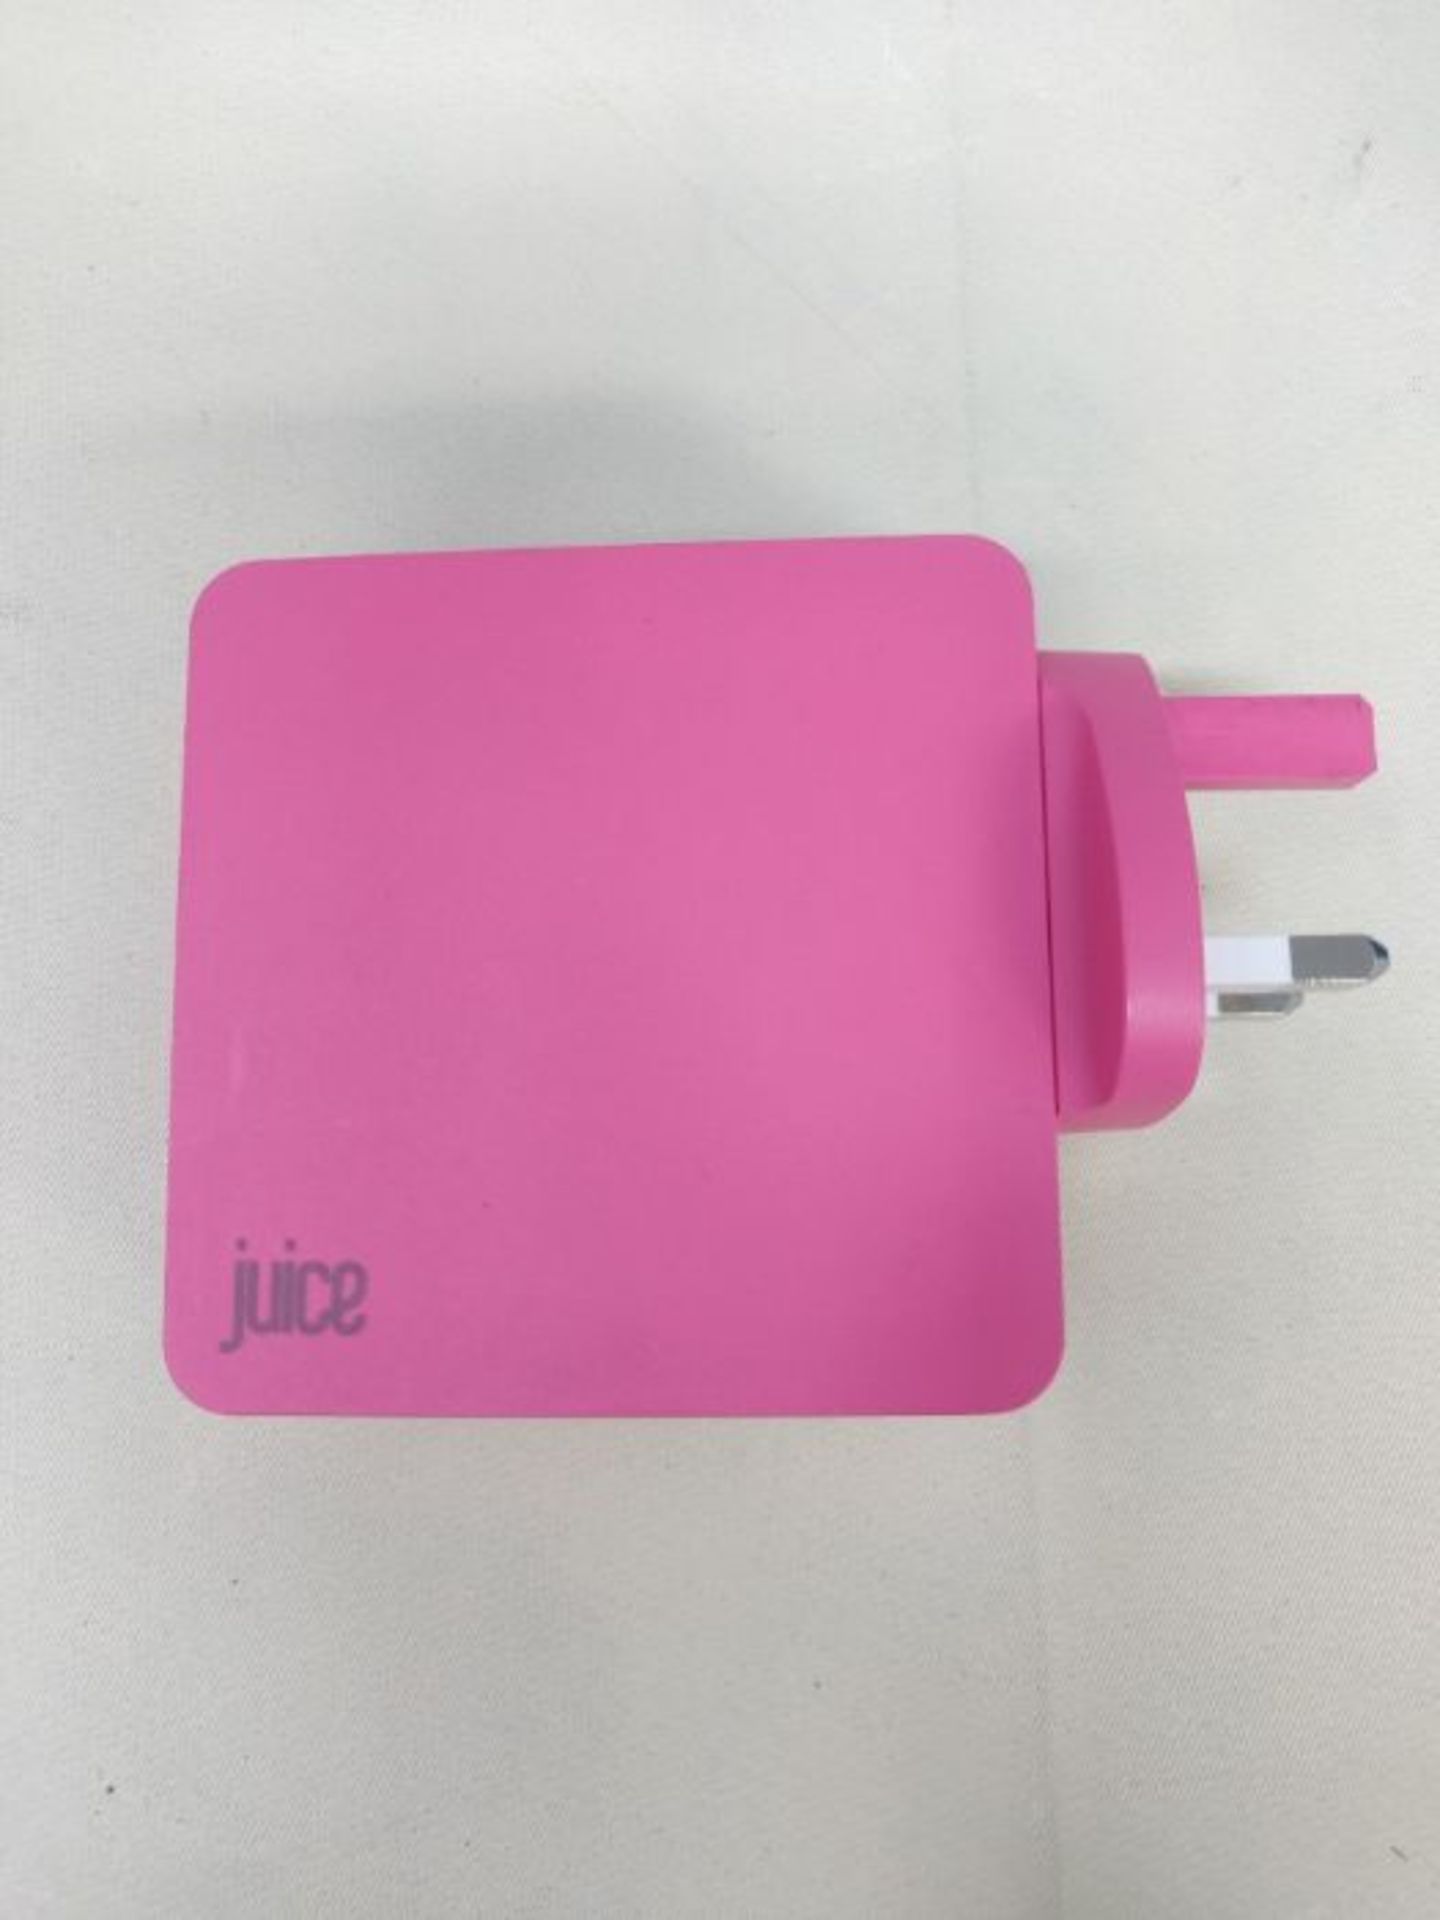 Juice Mains 4 Port USB Charger Type C 3.4A - Pink - Image 2 of 2